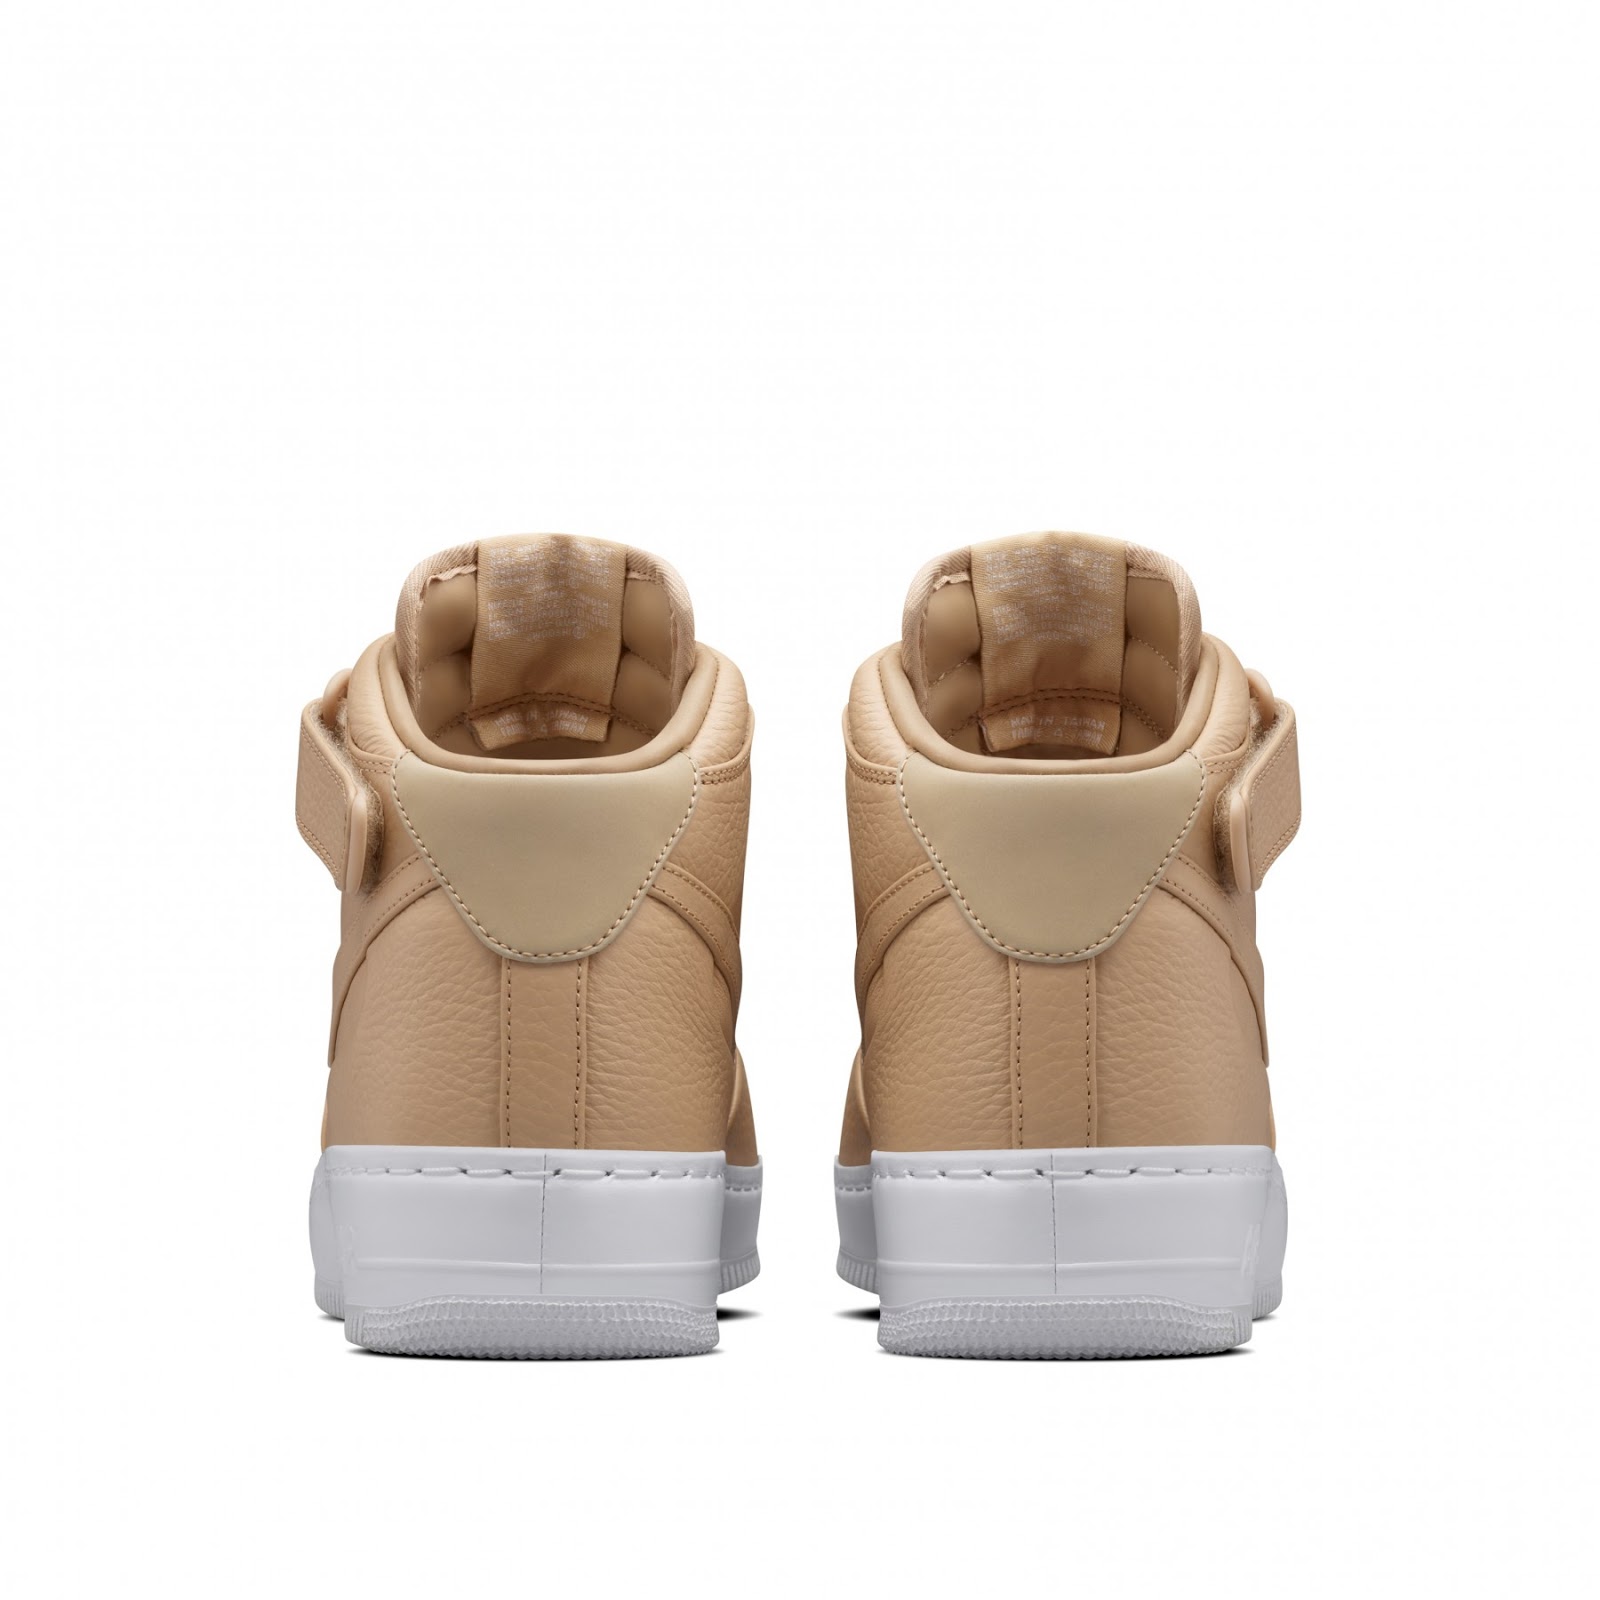 Tanned For The Season: NikeLab Air Force 1 Mid Low | SHOEOGRAPHY